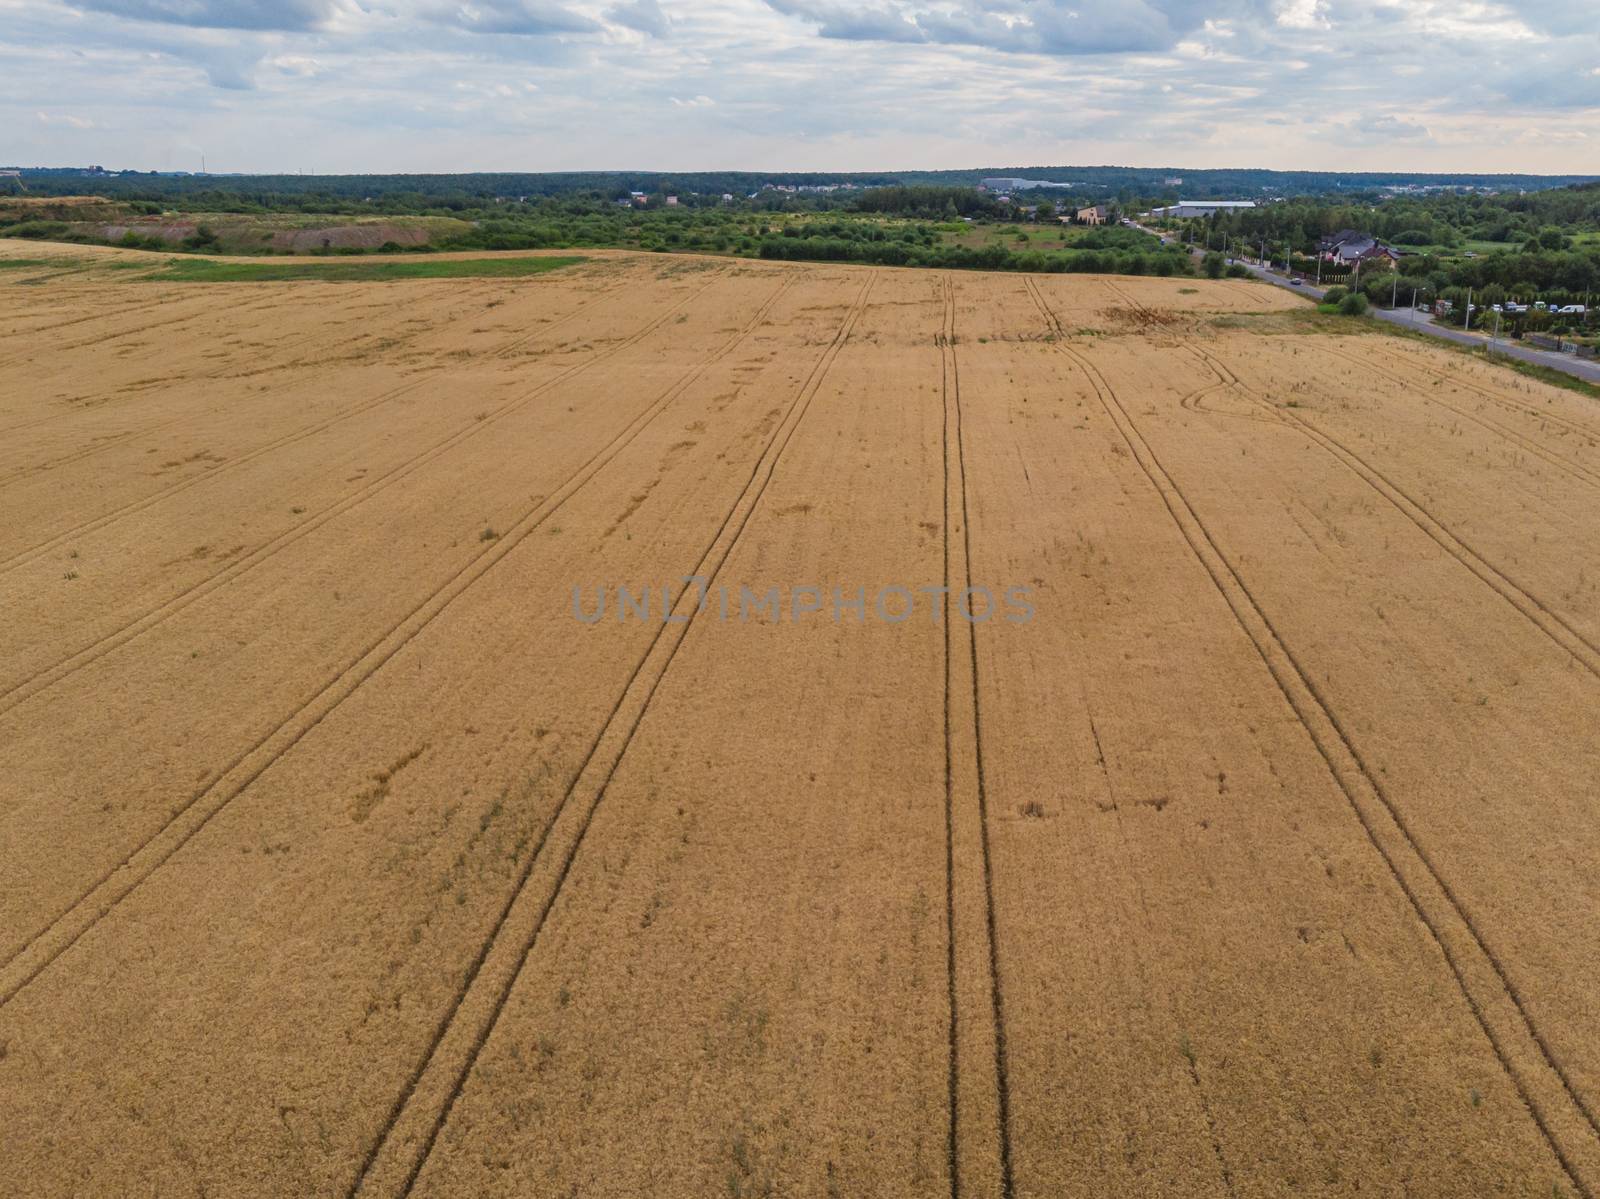 Aerial look to fields of wheat